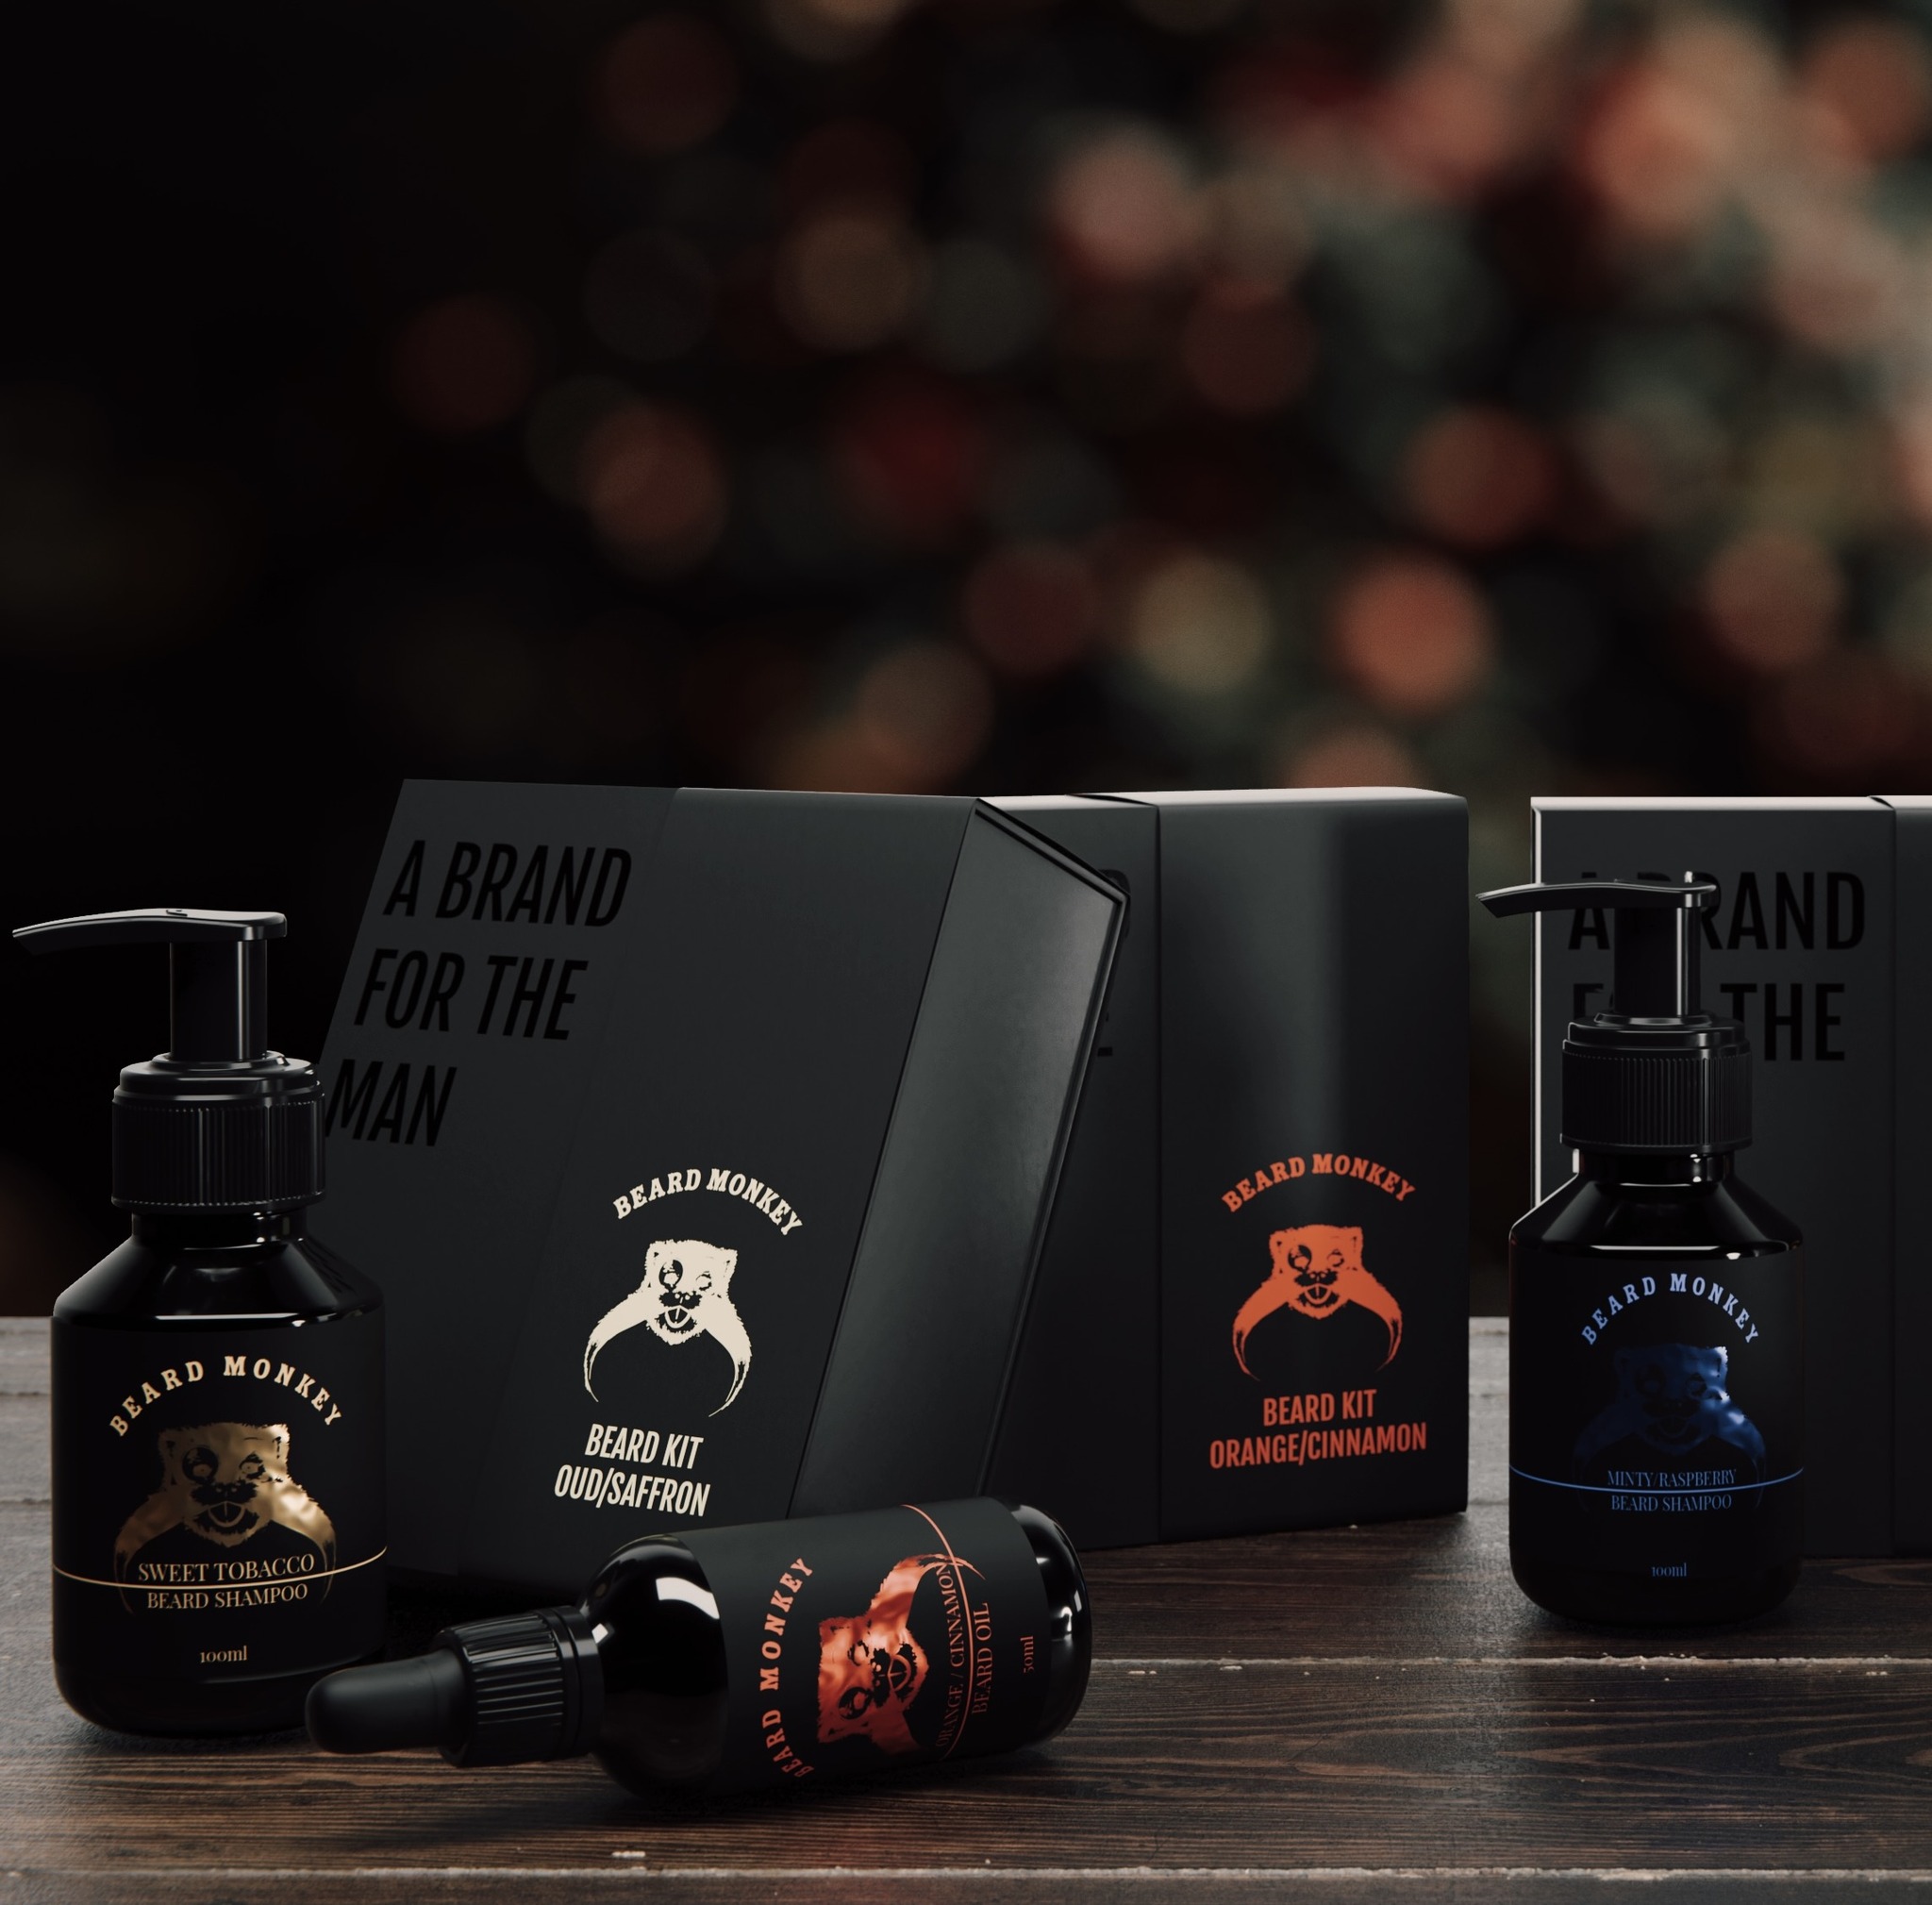 The Christmas gift of the year - Gift Sets from Beard Monkey🎁
Delivered in self-designed boxes ready to be given away🖤